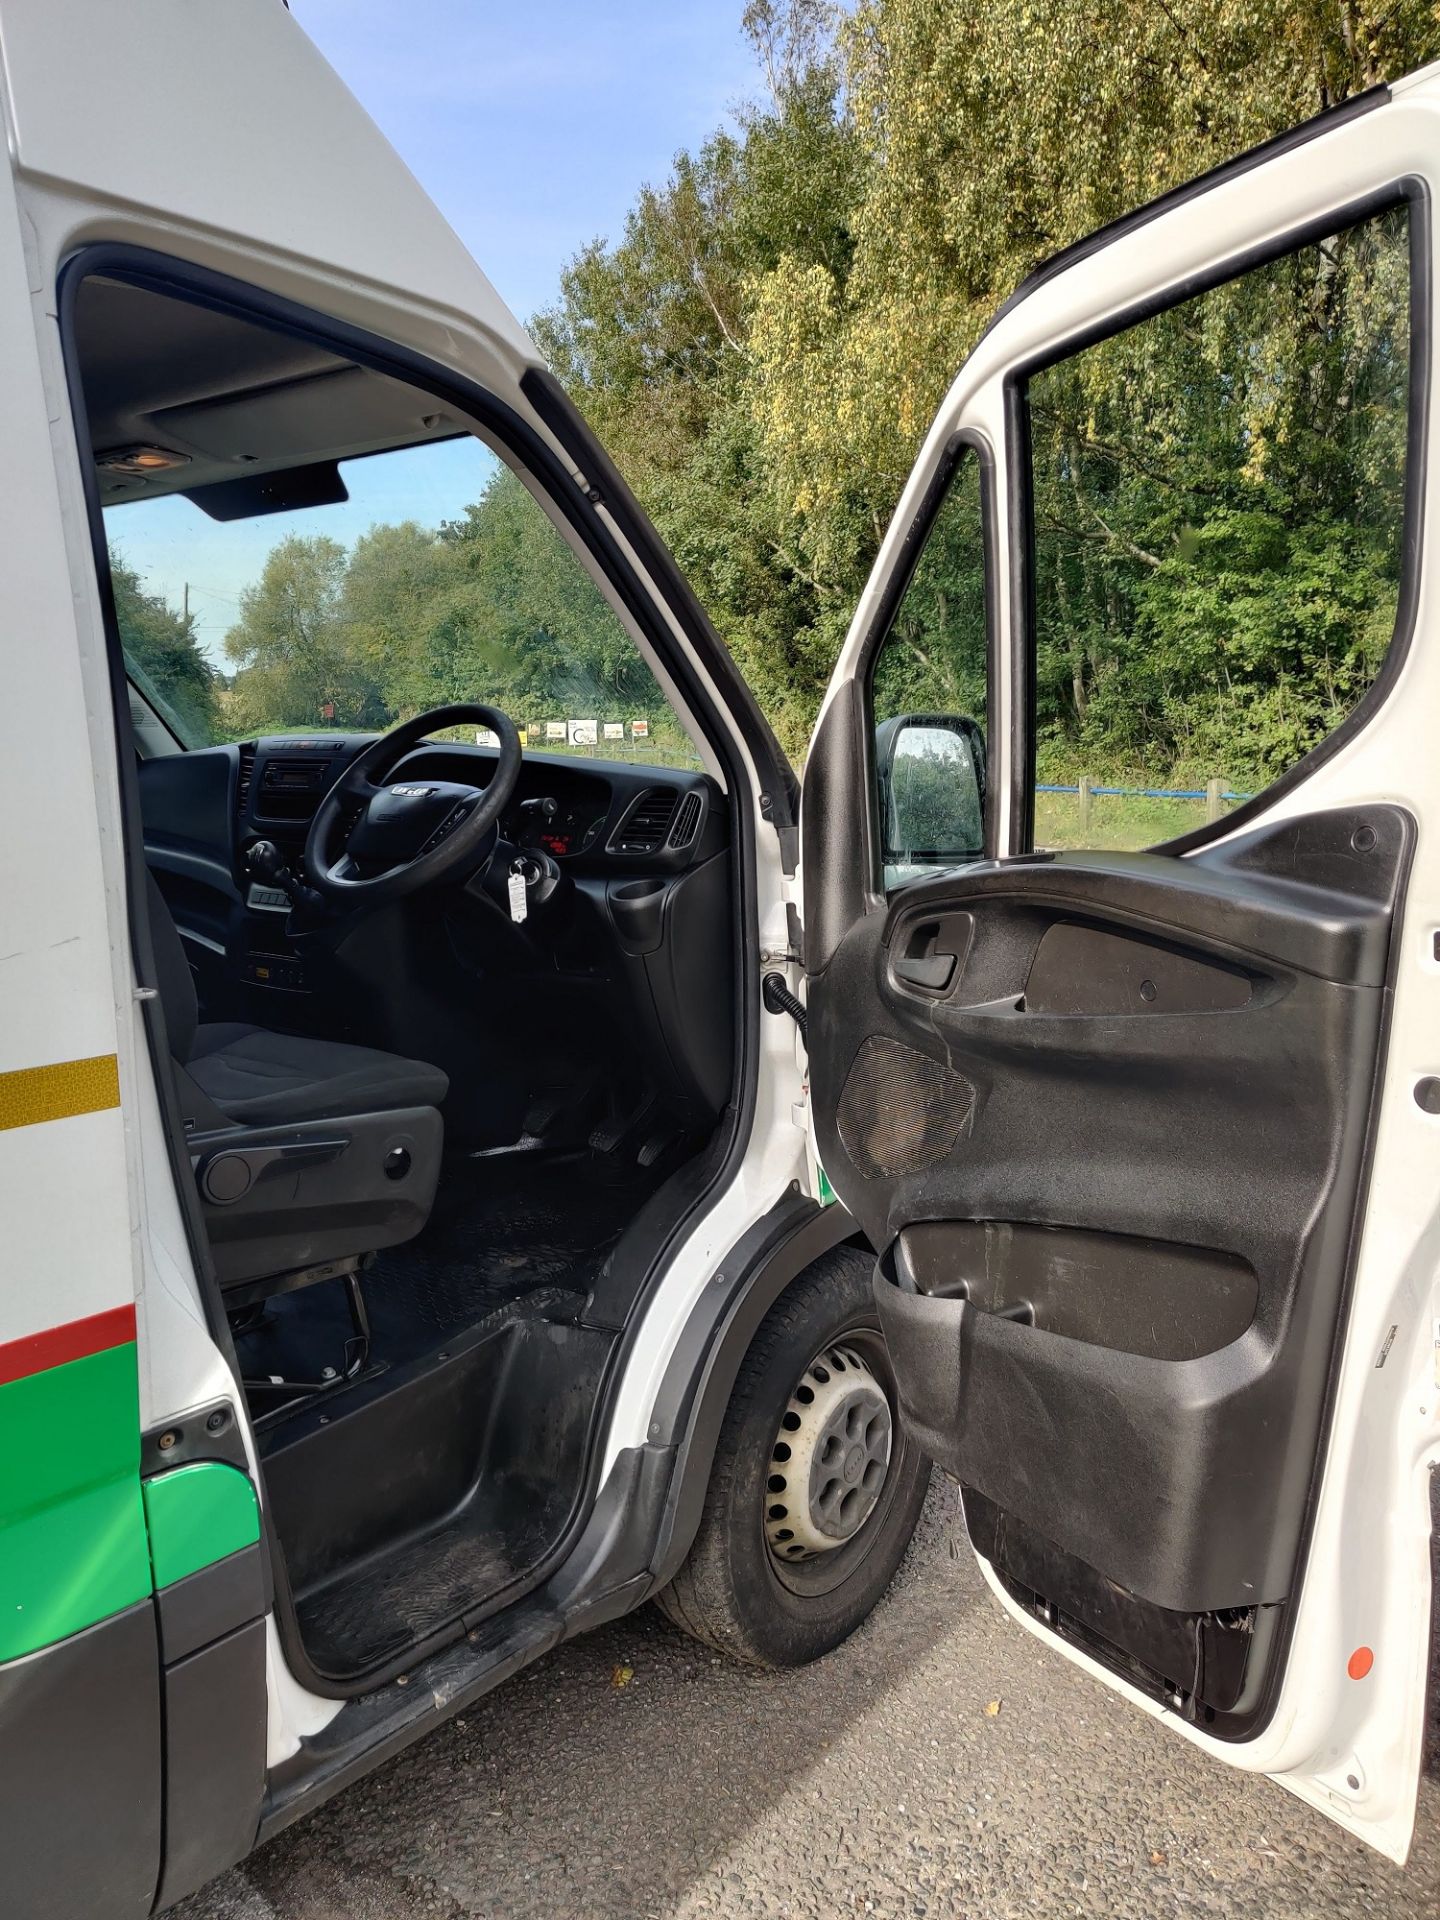 2015/15 REG IVECO DAILY 35S11 MWB WHITE 2.3 DIESEL PANEL VAN, SHOWING 0 FORMER KEEPERS *NO VAT* - Image 10 of 15